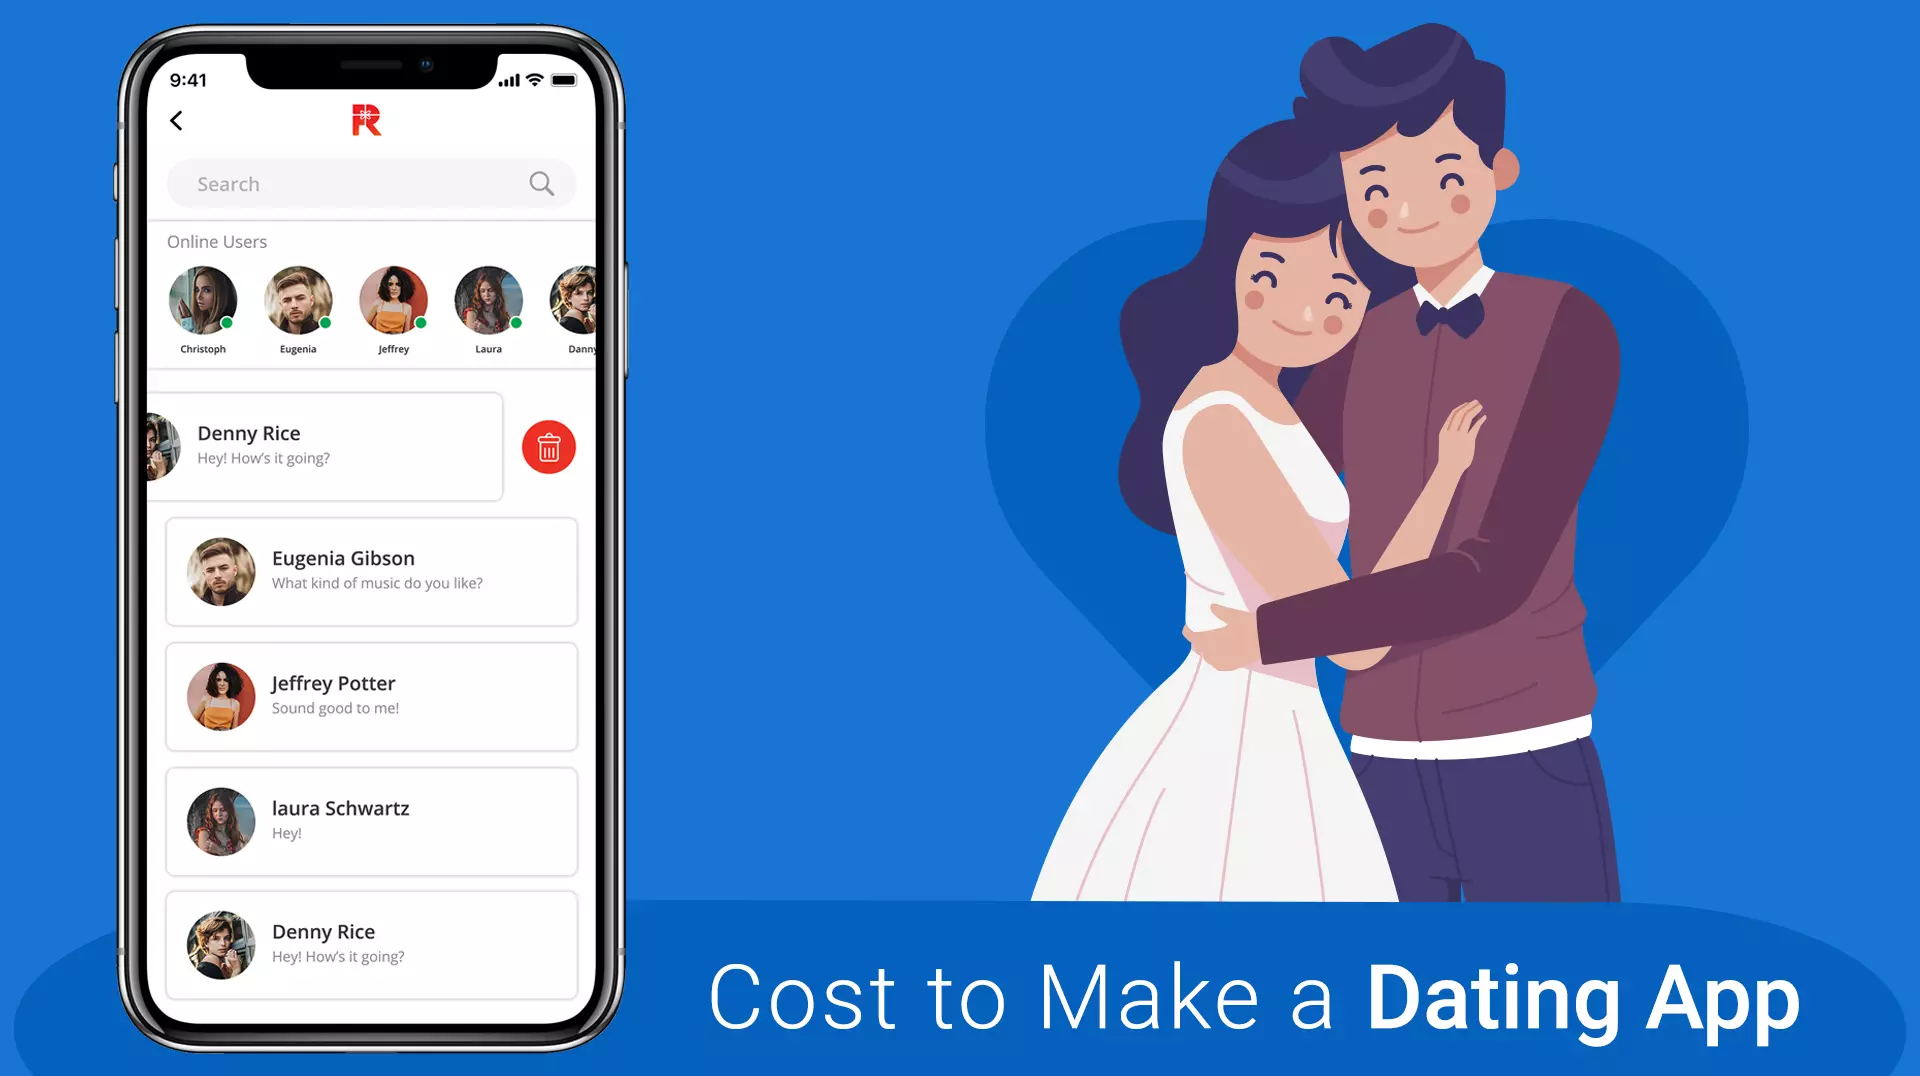 How Much Does It Cost to Make a Dating App?